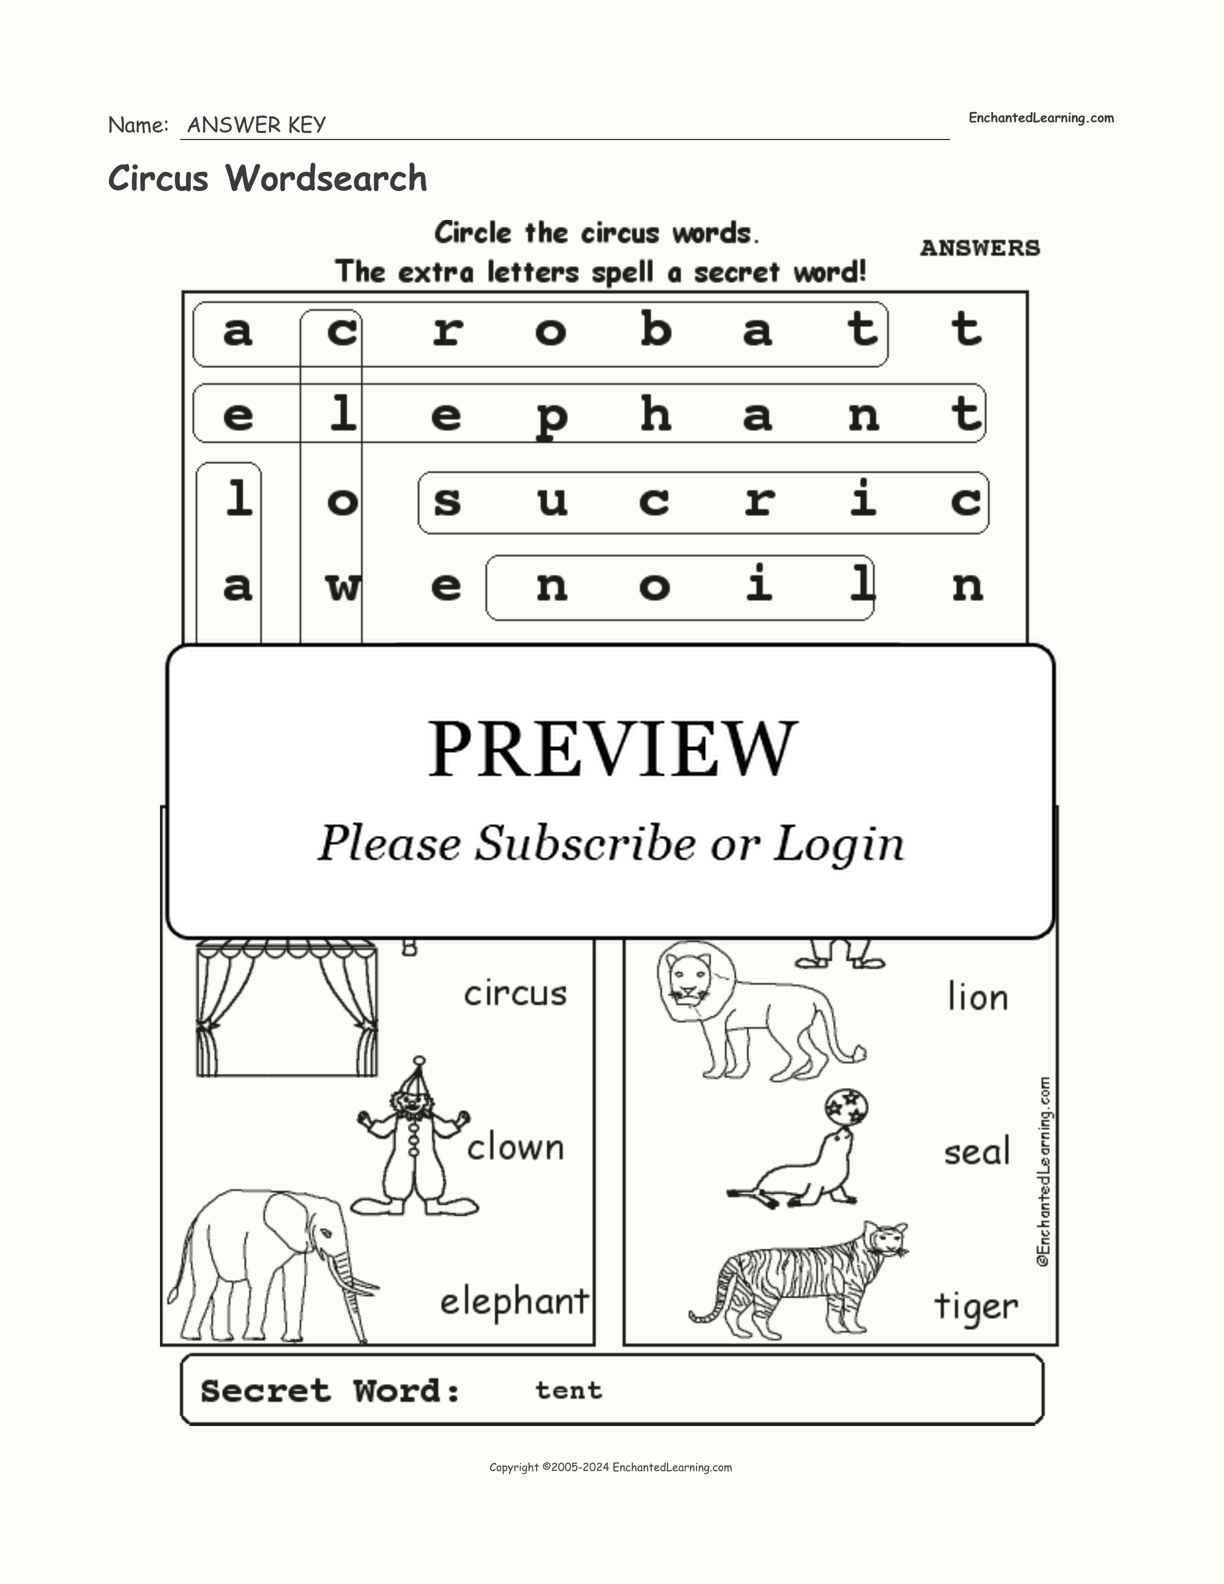 Circus Wordsearch interactive worksheet page 2